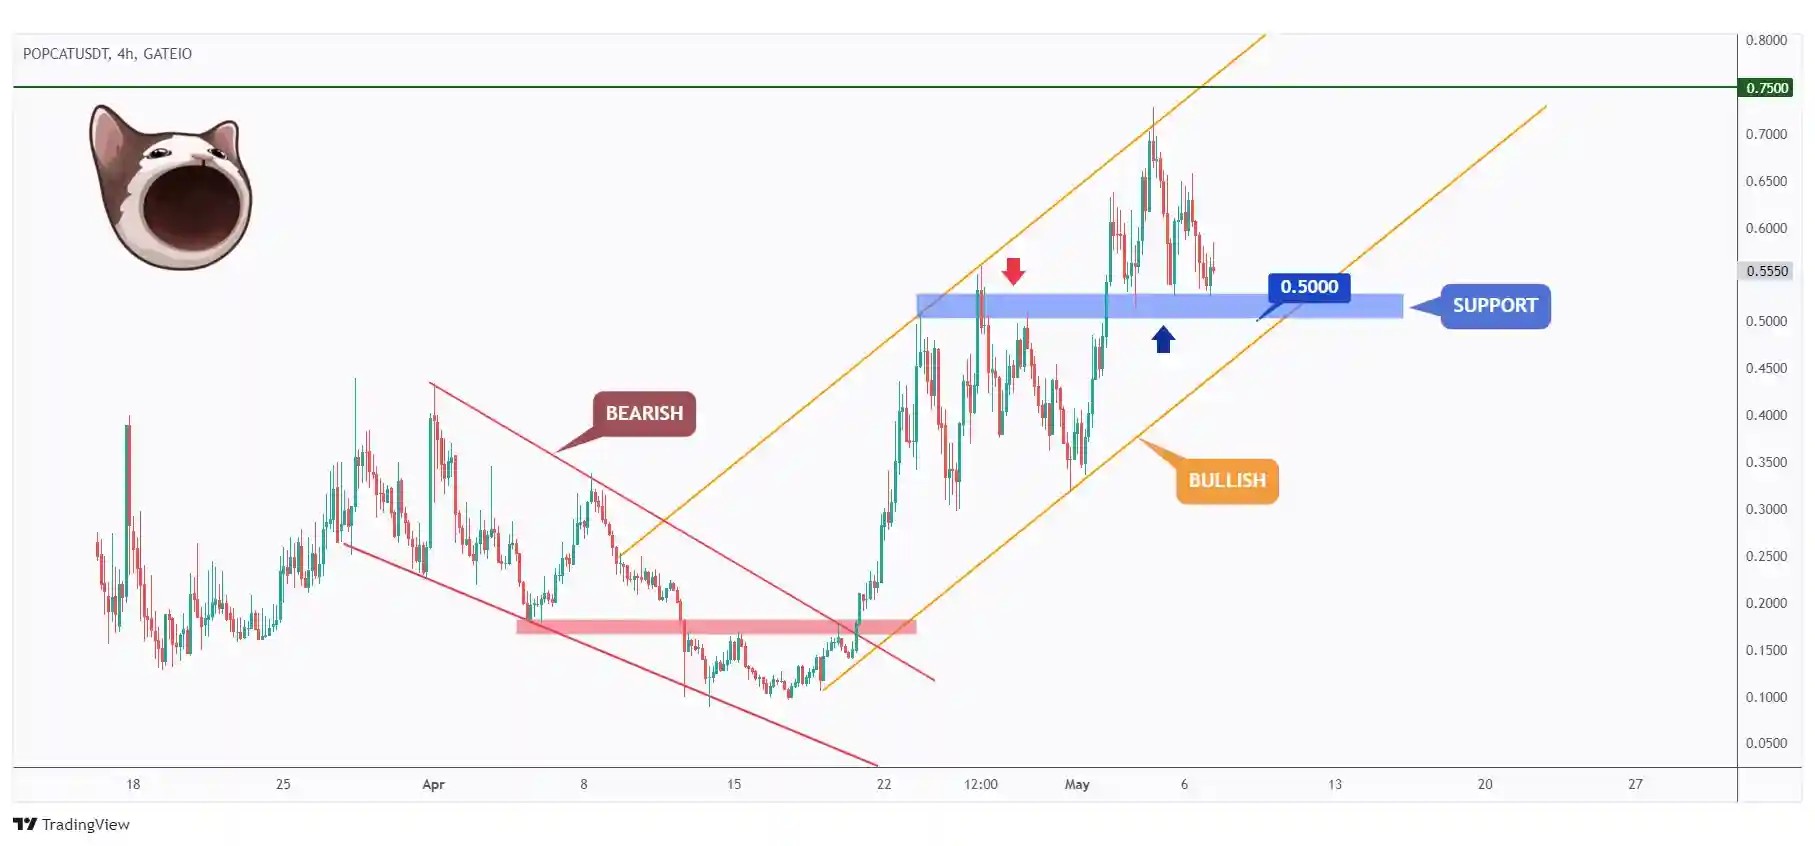 POPCAT 4h chart overall bullish trading within a rising channel and currently in a correction phase retesting the lower bound of the channel.